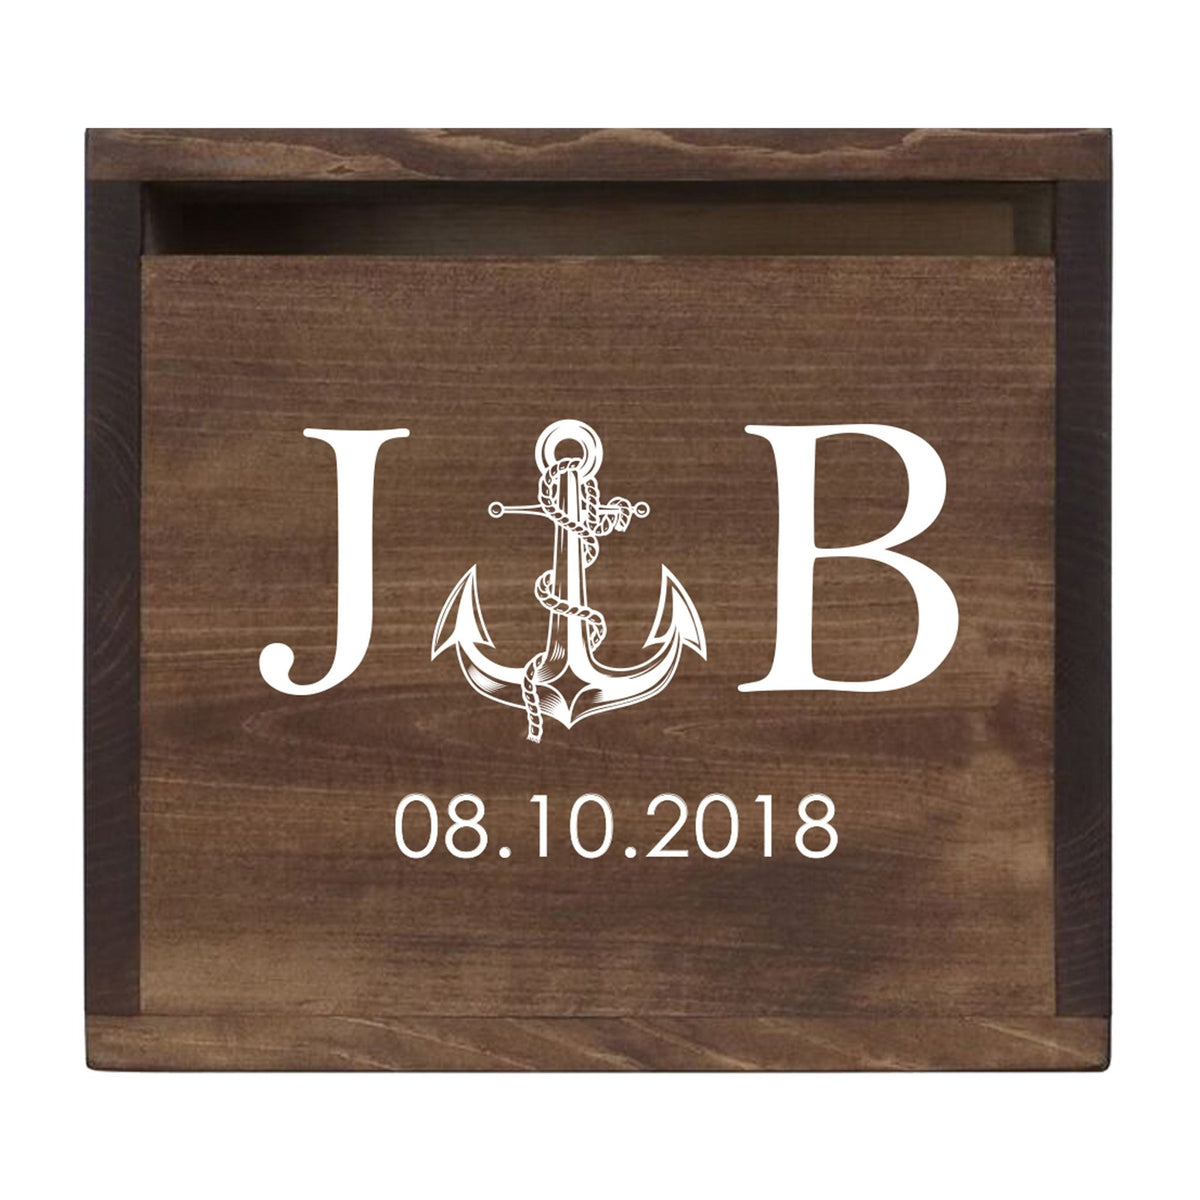 Personalized Wooden Card Box for Wedding Ceremonies, Venues, Receptions, Bridal Showers, and Engagement Parties 13.5x12 - J&amp;B (Anchor) - LifeSong Milestones